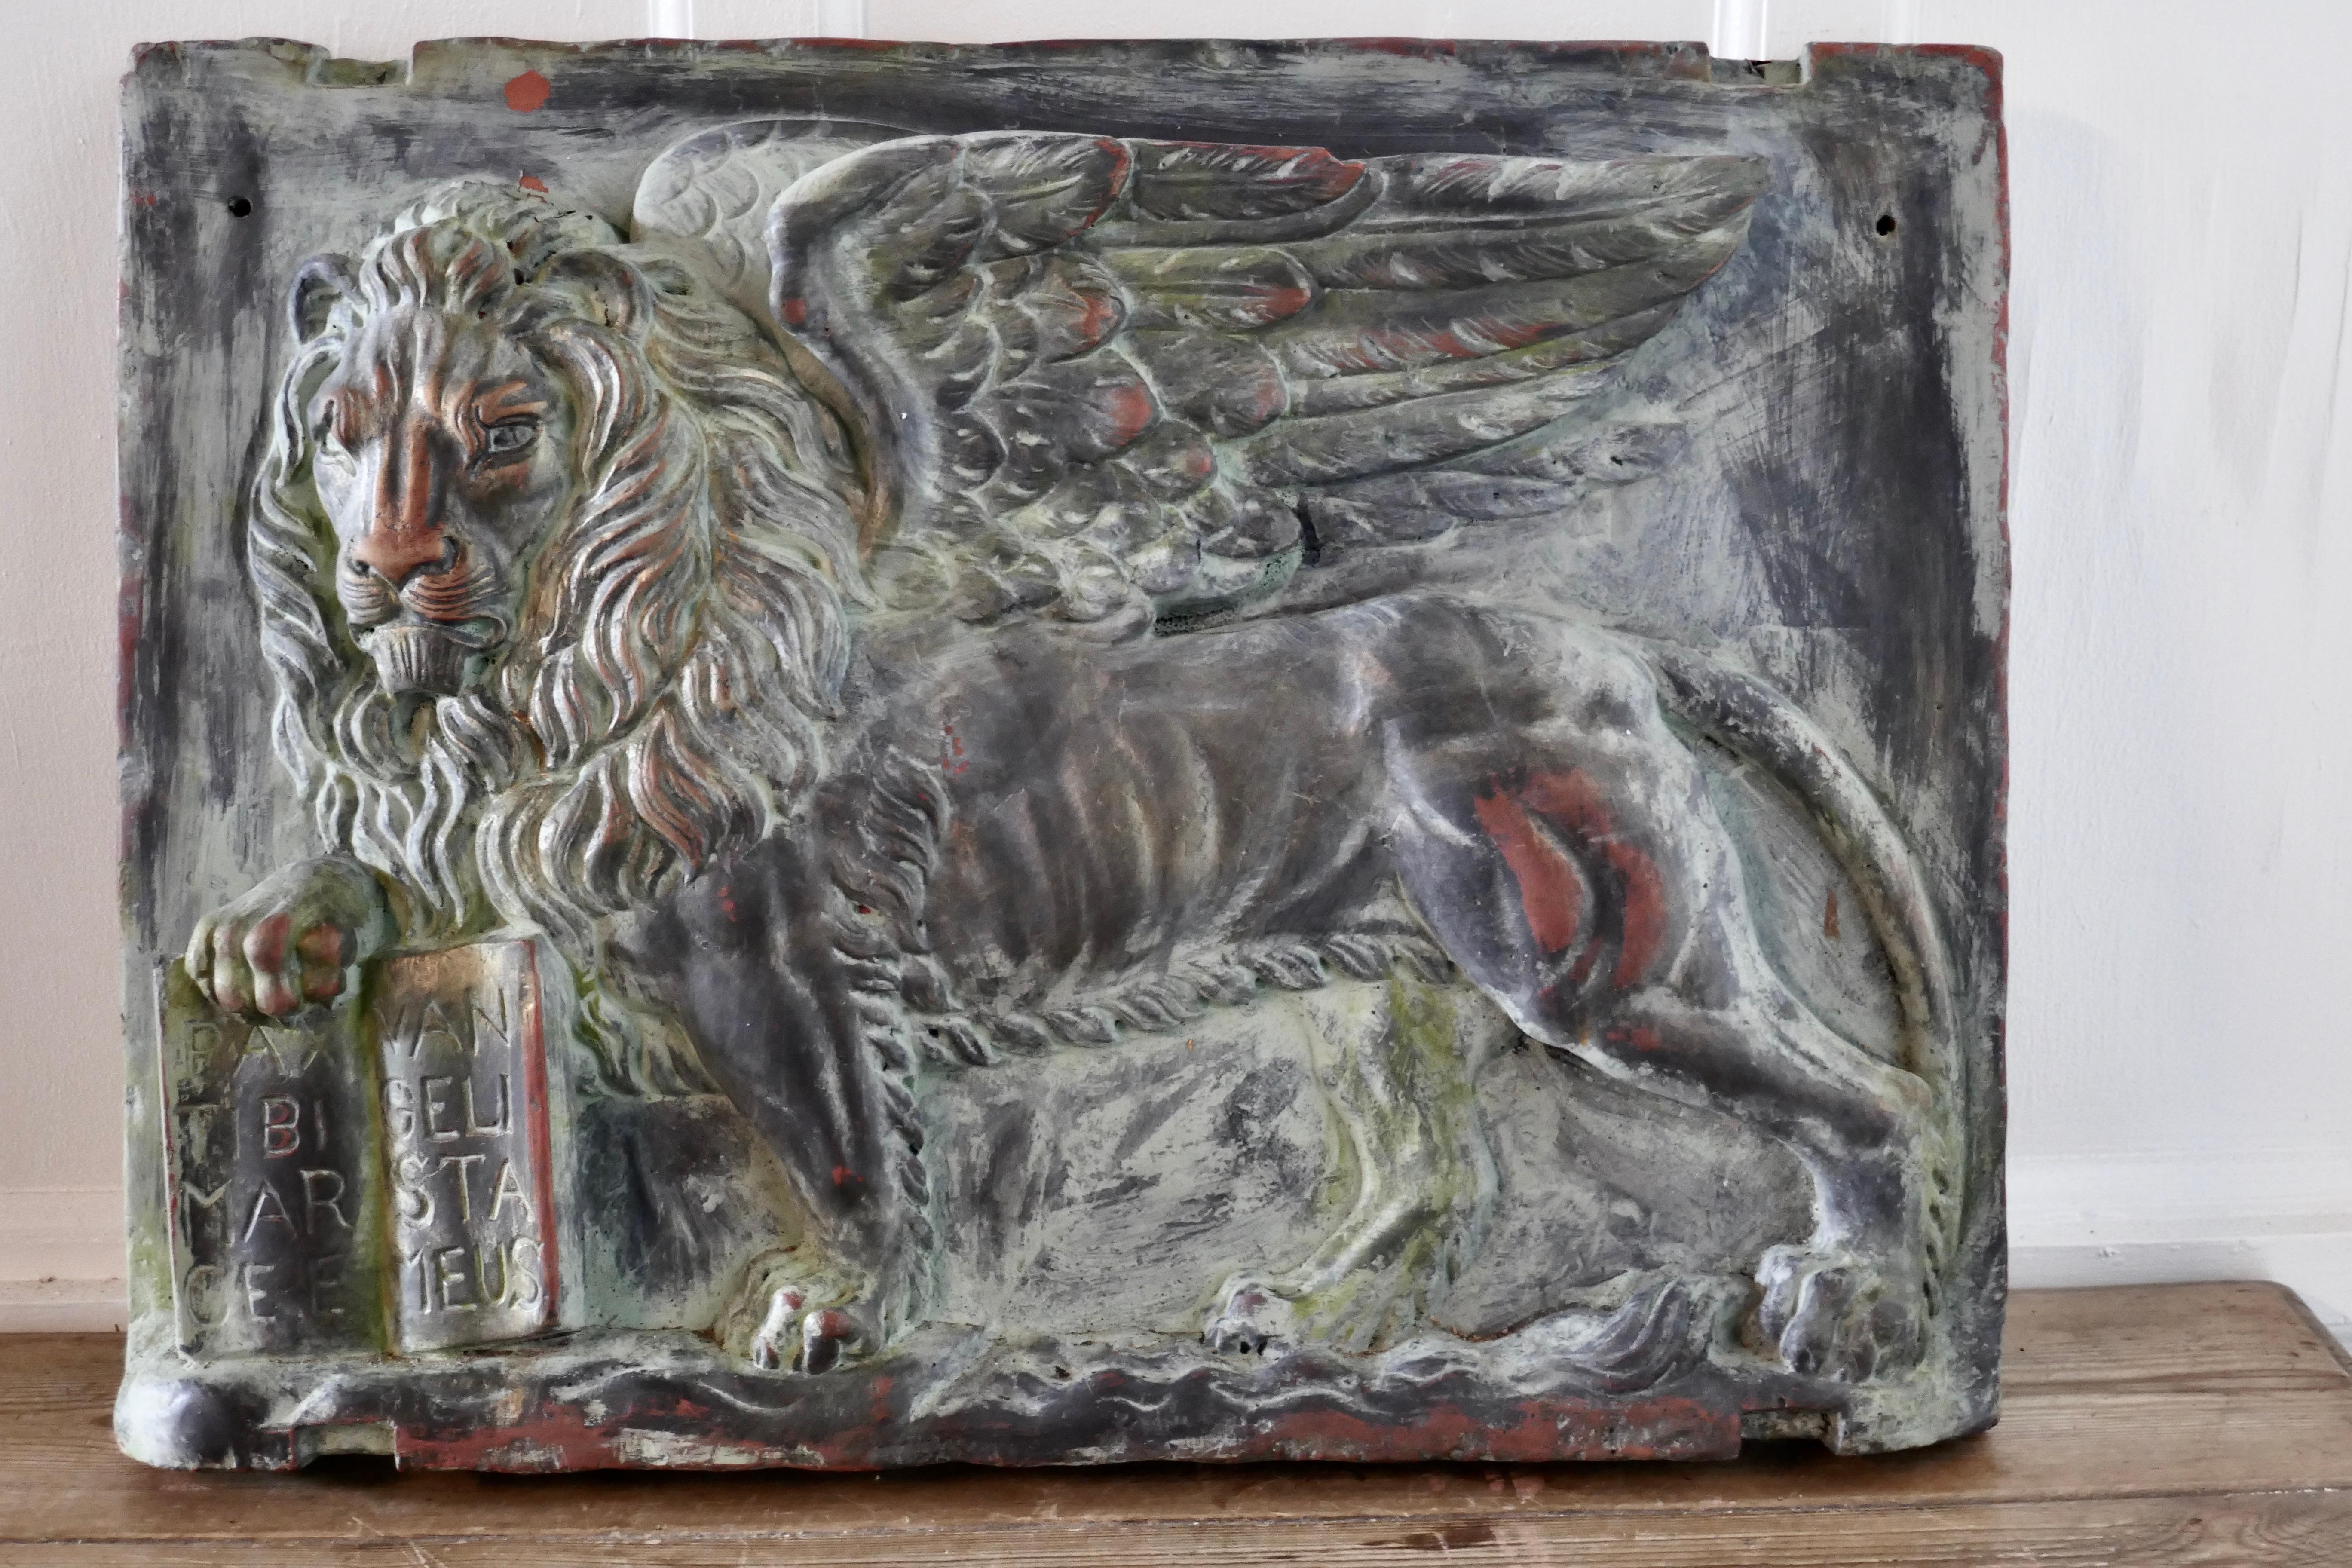 19th Century Heavy Bronze Effect Wall Plaque Depicting the Winged Lion of St Mark, Venice